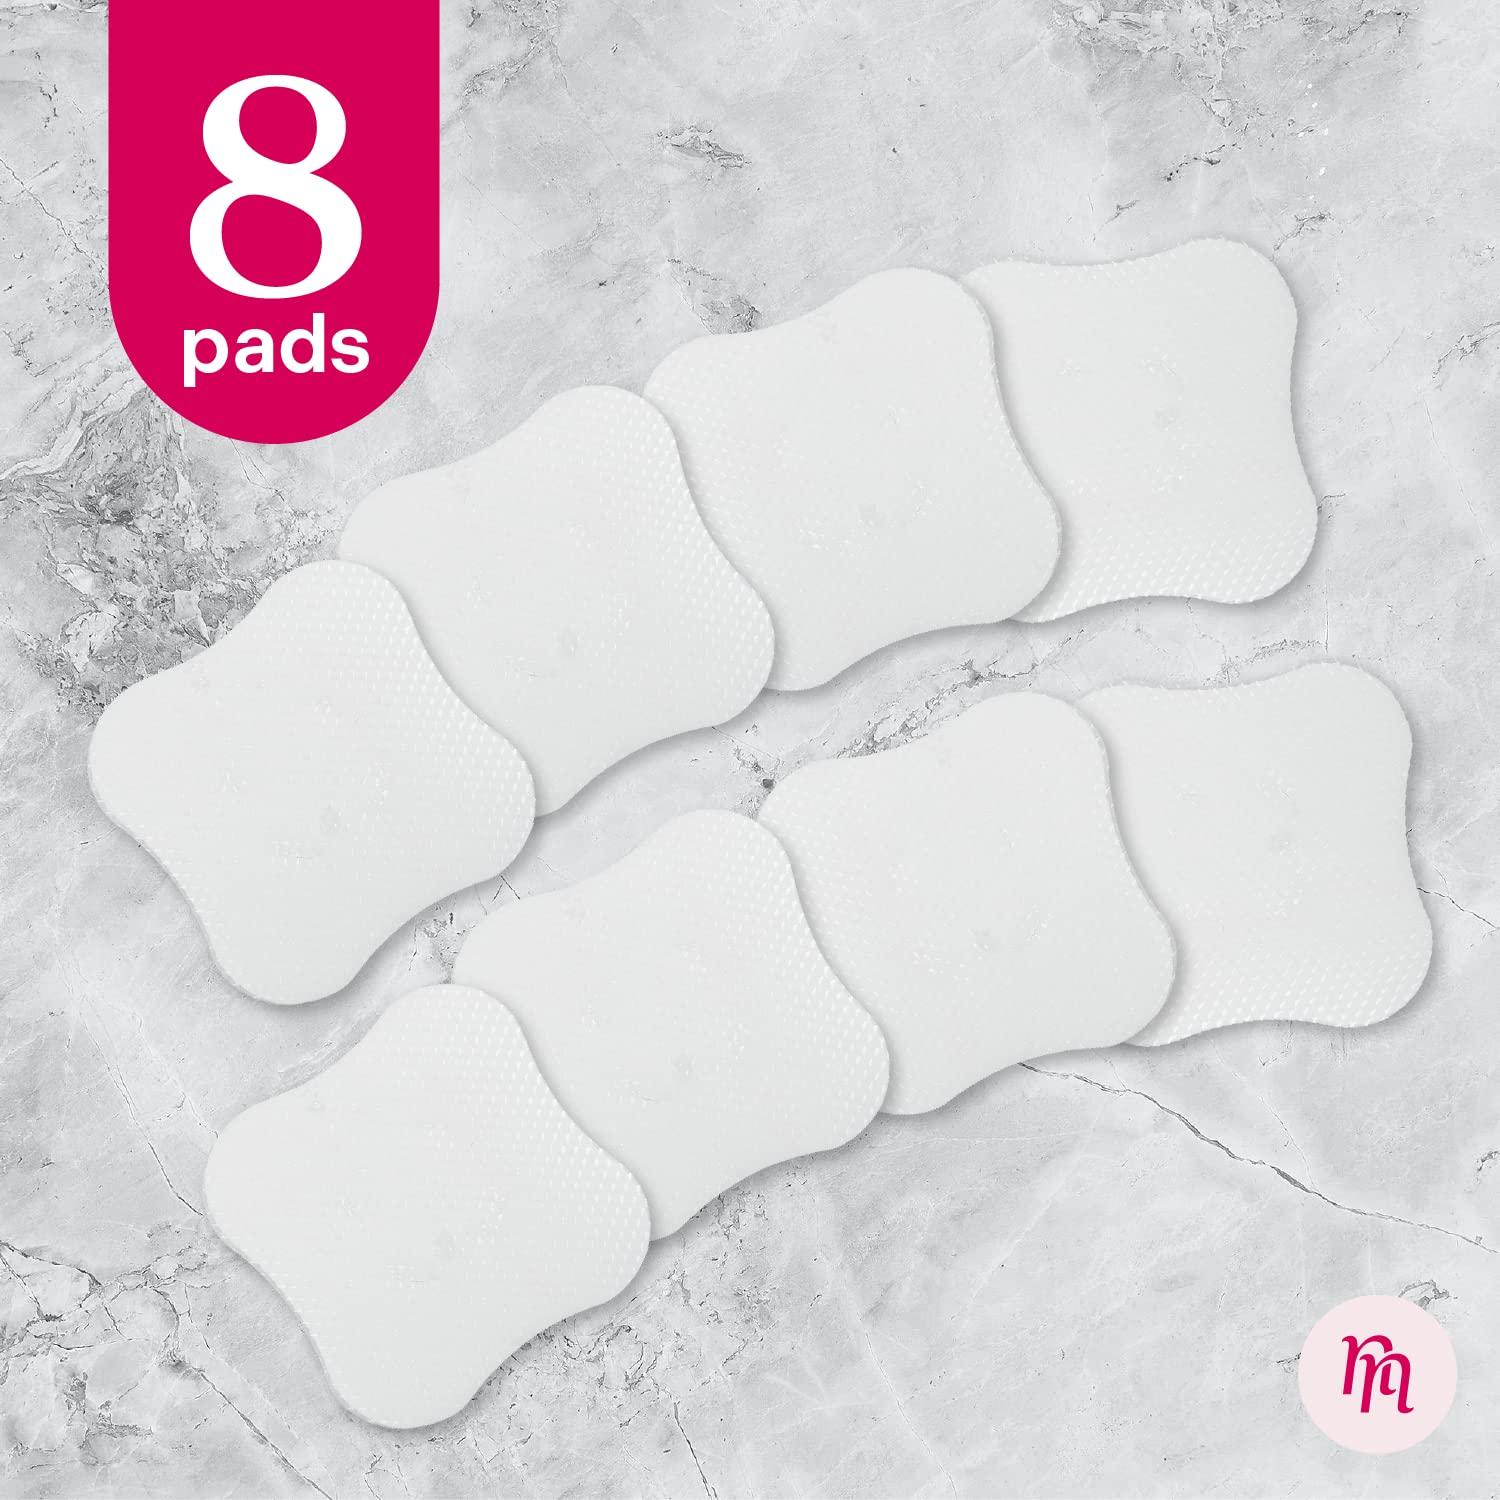 First Days Maternity - Hydrogel Breast Pads for Sore Nipples, Instant  Cooling Relief, Suitable for All Skin Types, Pads with Soft Fabric Backing  and 1